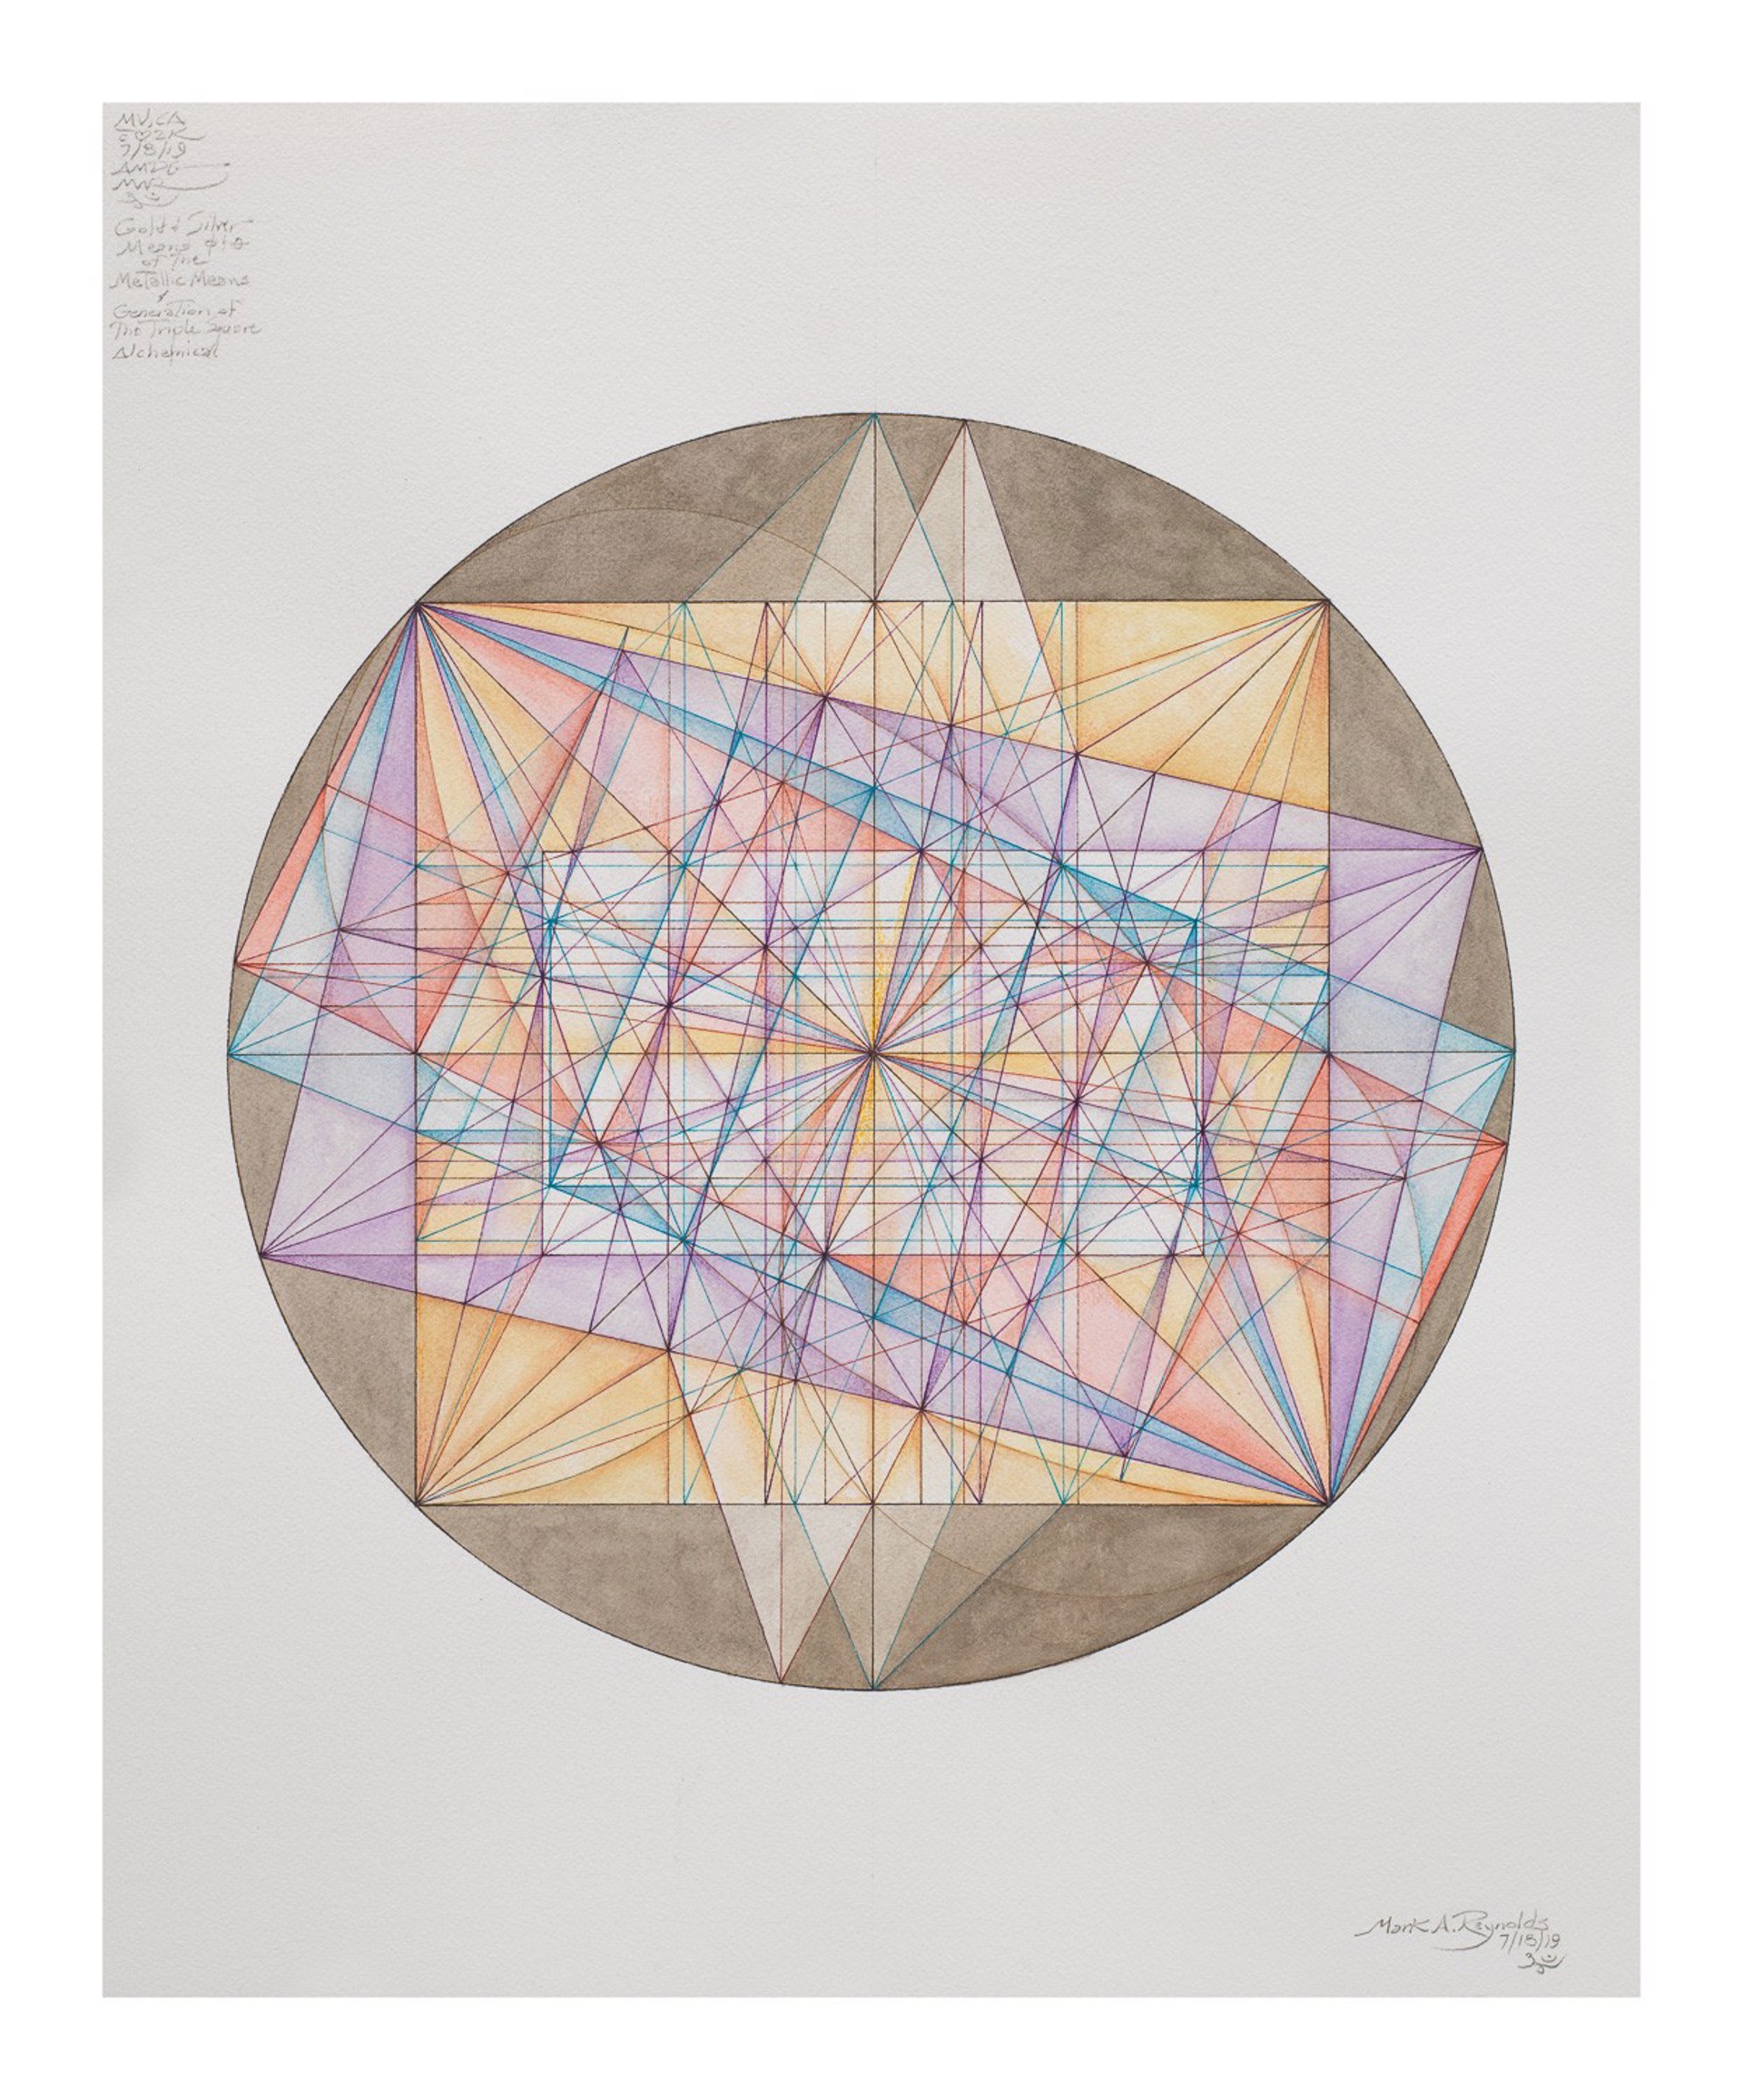 Thales Series, ATROTW, Gold and Silver Means, the Triple Square, 7.18.19 by Mark Reynolds